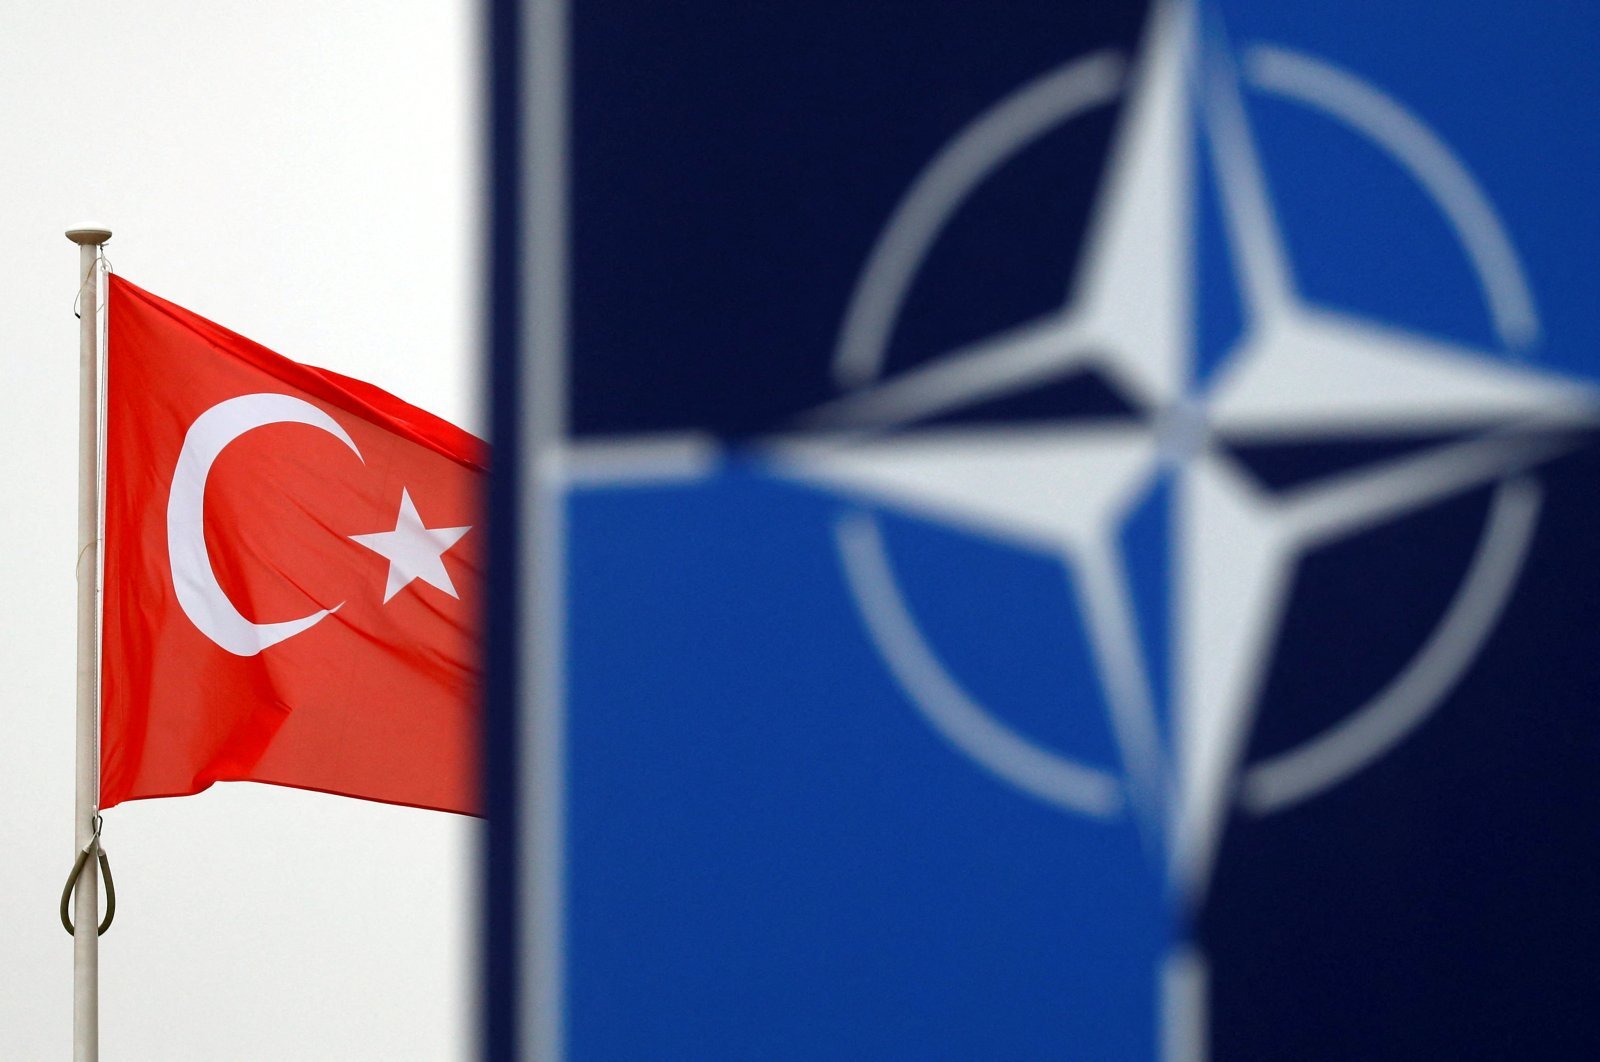 Turkish delegation to have talks in Brussels for Nordic countries’ NATO bid